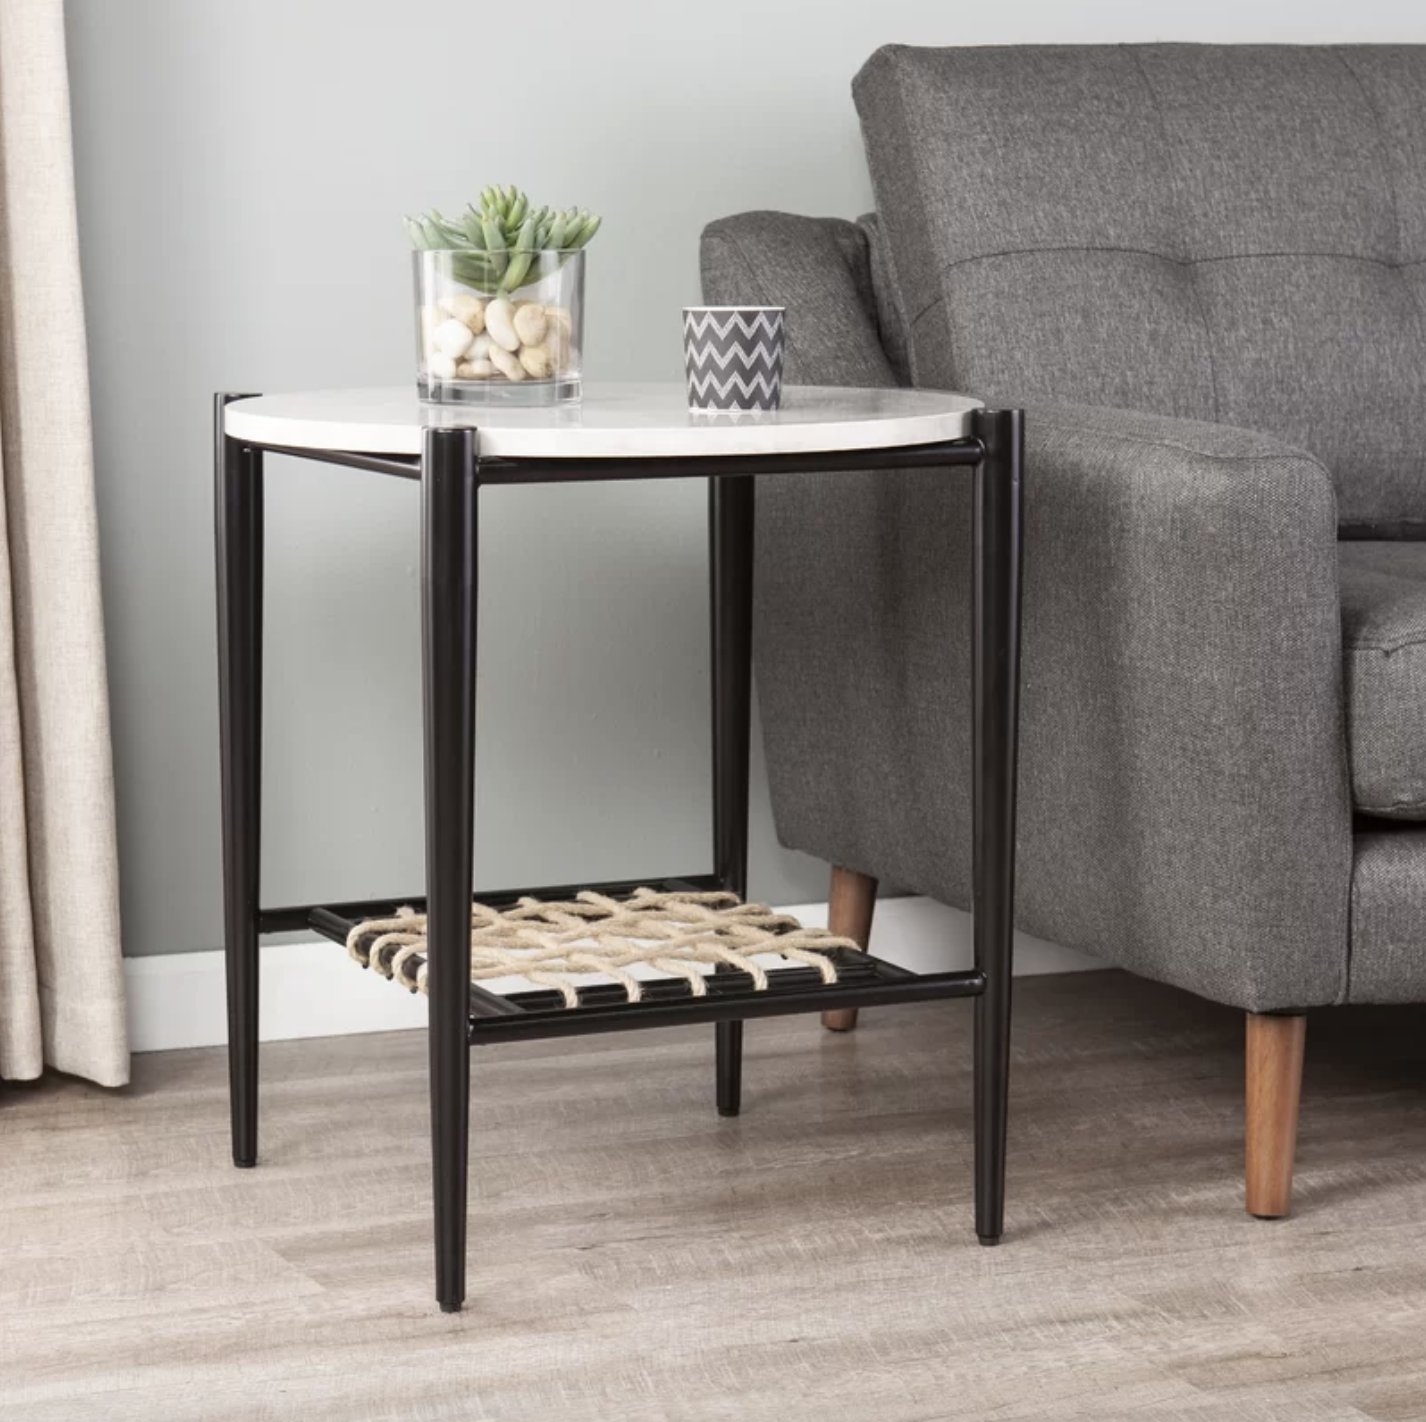 Relckin 2 Piece Coffee Table Set - Image 1